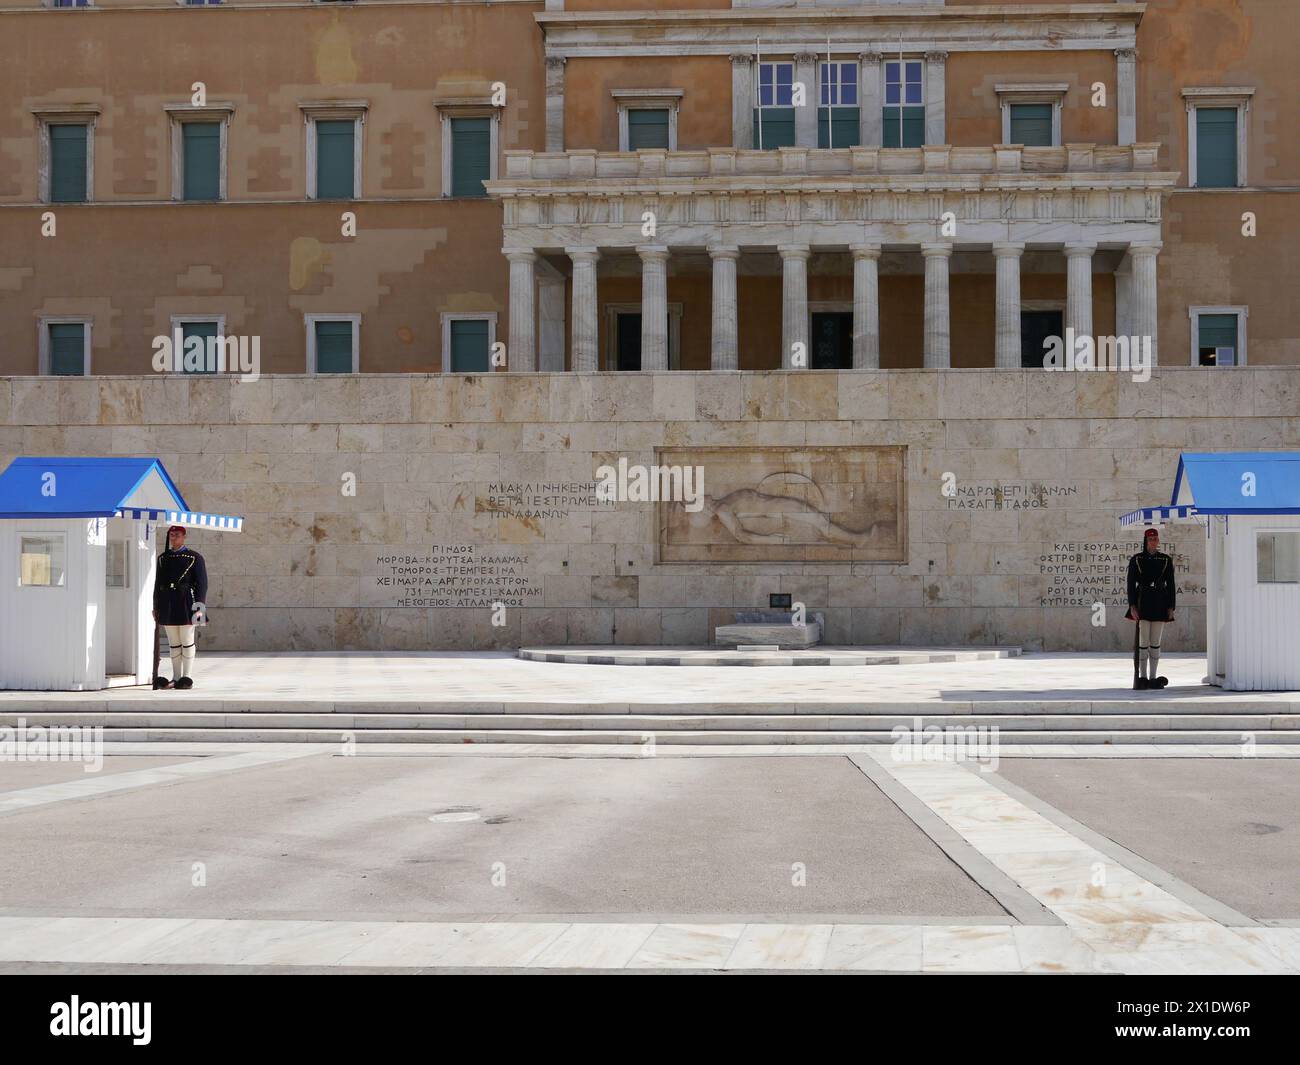 The Evzones, presidential guard, stand guard outside the old Royal Palace that now serves as the Greek Parliament building  in Athens, Greece Stock Photo